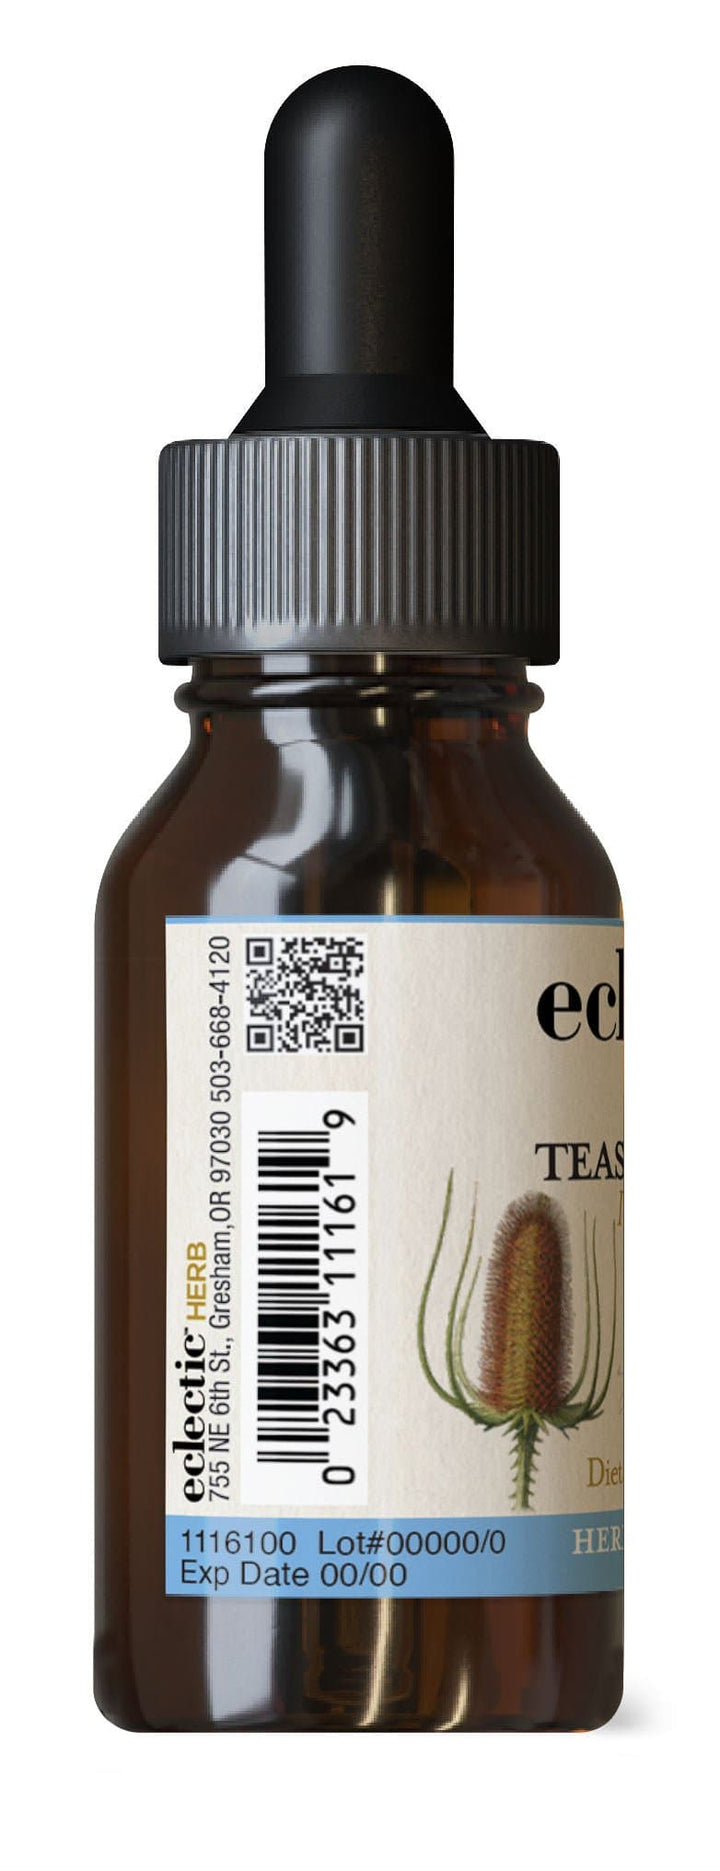 Teasel Root Extract - eclecticherb